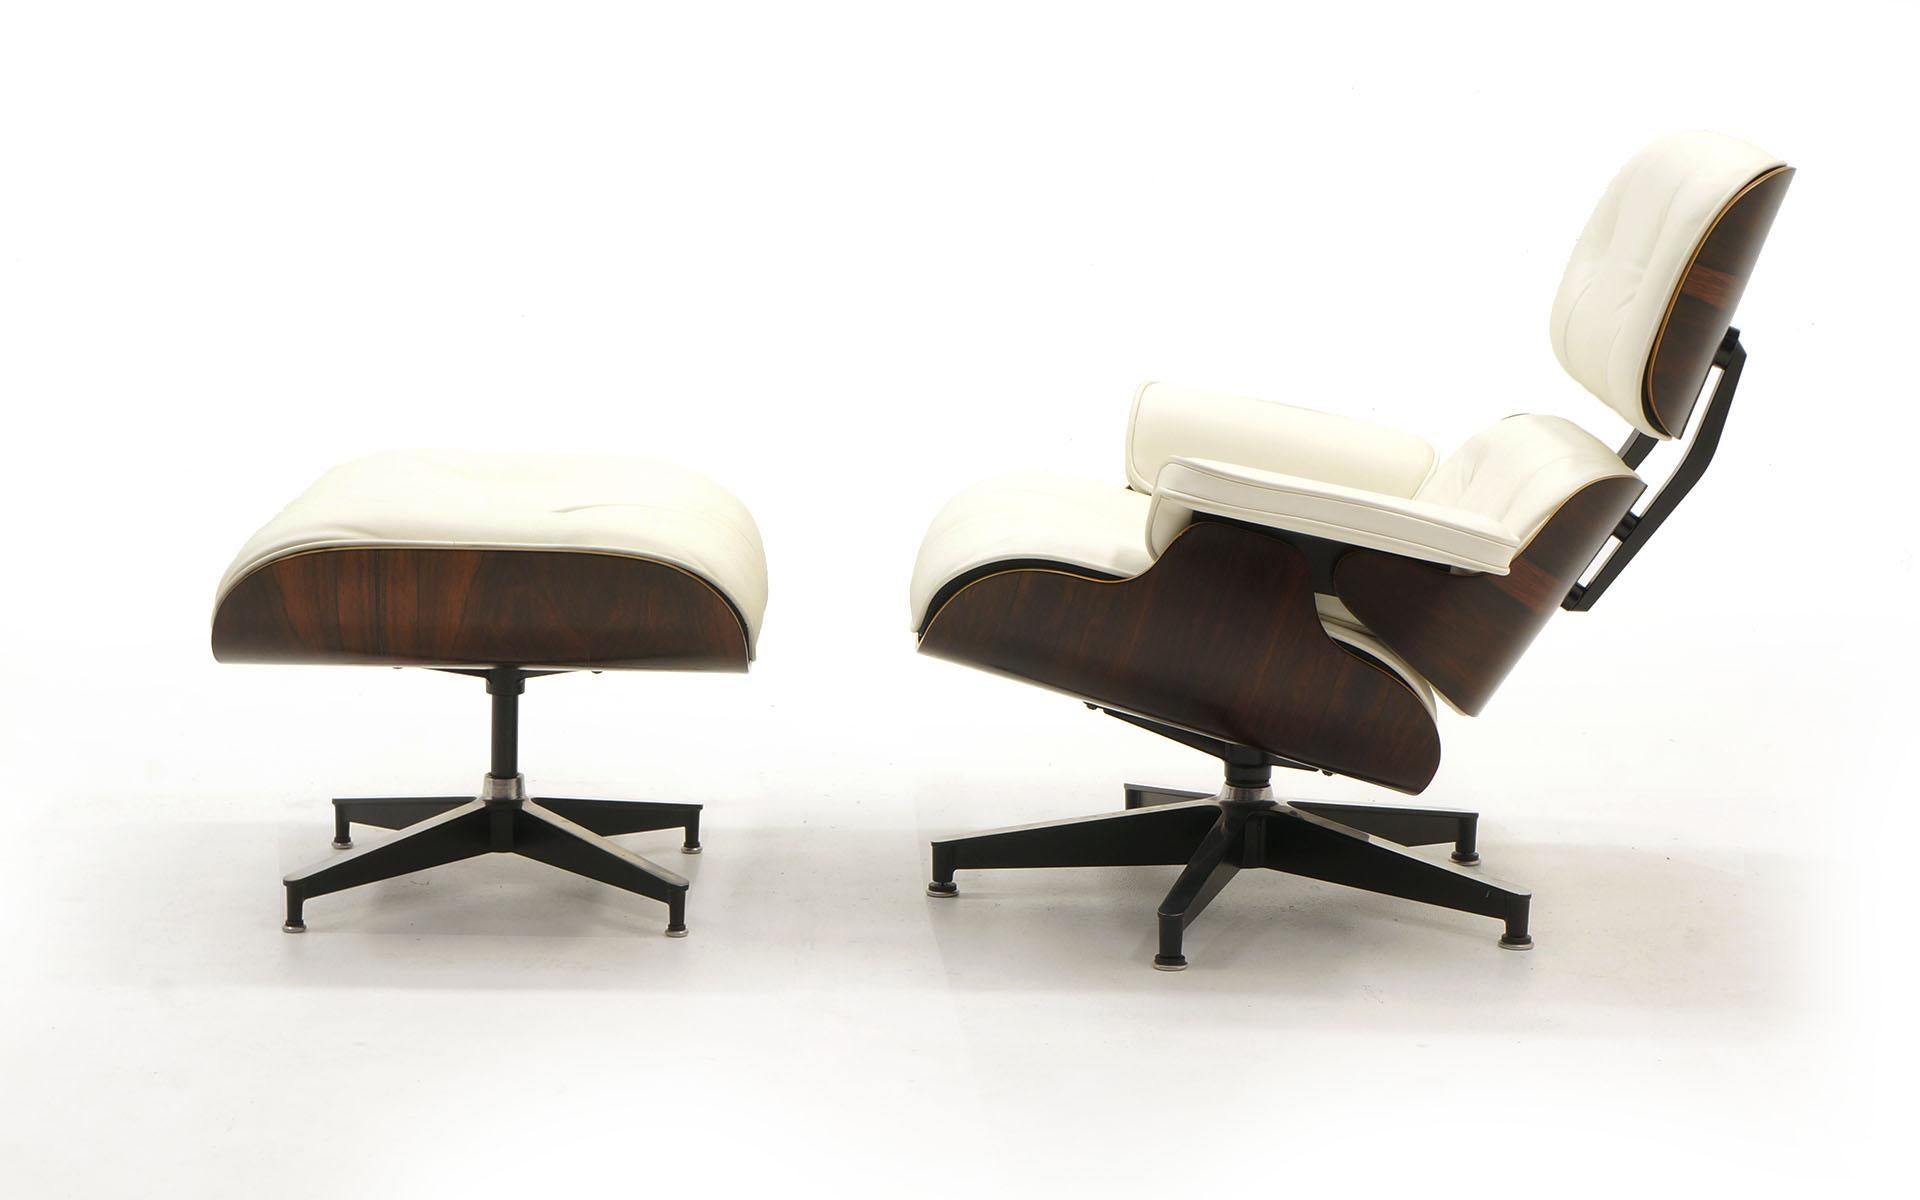 Charles and Ray Eames Brazilian rosewood Lounge chair with ottoman and new white leather cushions from Herman Miller. Signed with the early round white medallion. This set is the best of both worlds: rare, early production Brazilian rosewood and new